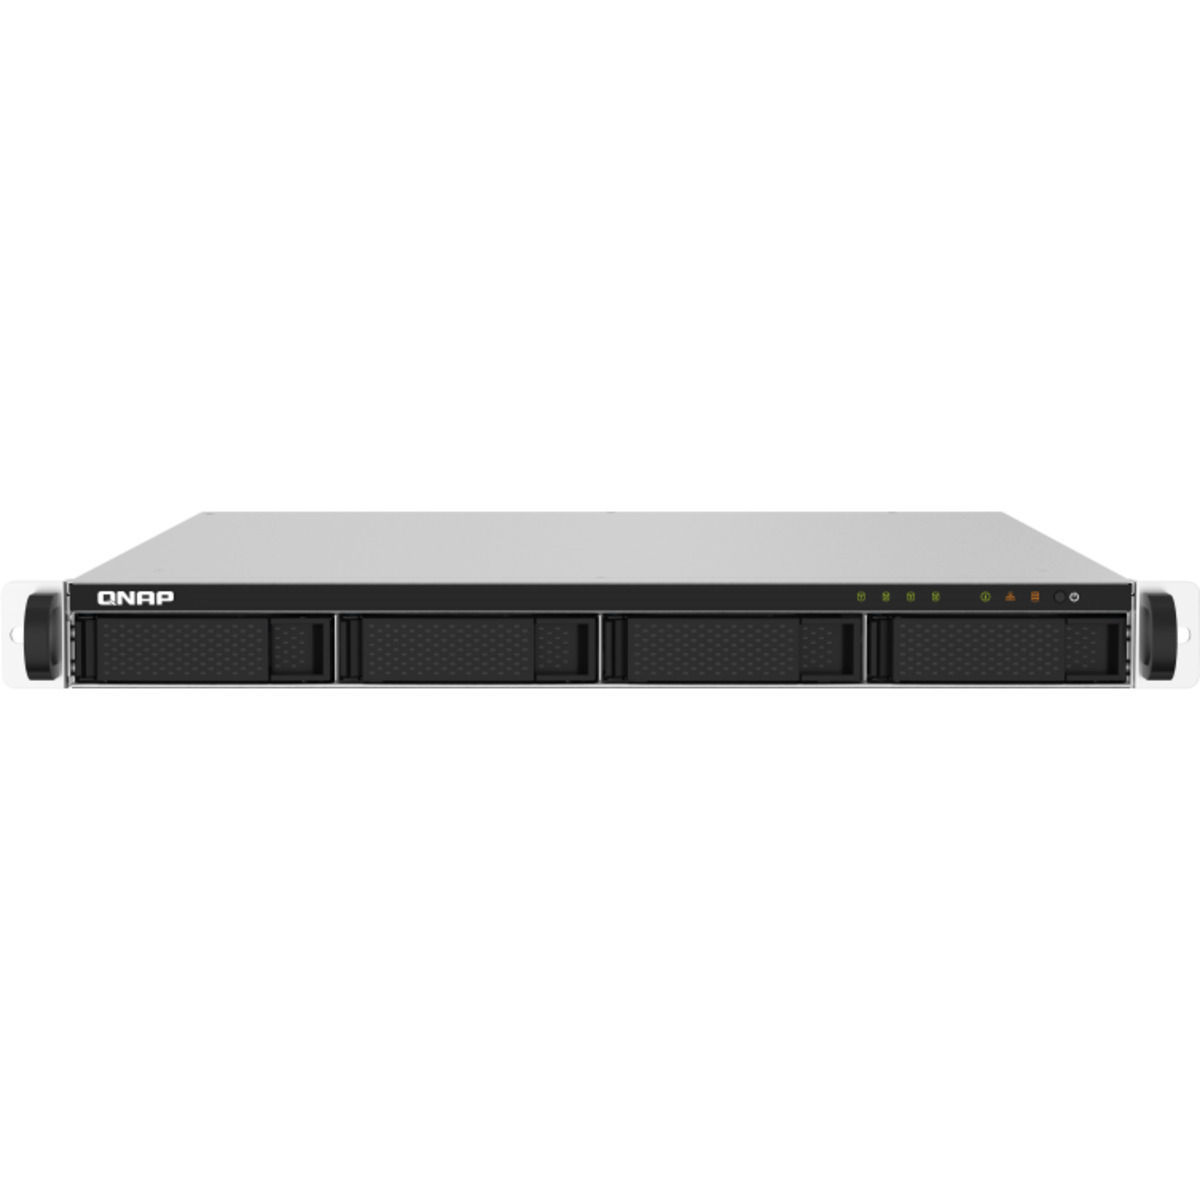 QNAP TS-432PXU-RP 32tb 4-Bay RackMount Personal / Basic Home / Small Office NAS - Network Attached Storage Device 4x8tb Seagate IronWolf ST8000VN004 3.5 7200rpm SATA 6Gb/s HDD NAS Class Drives Installed - Burn-In Tested - FREE RAM UPGRADE TS-432PXU-RP